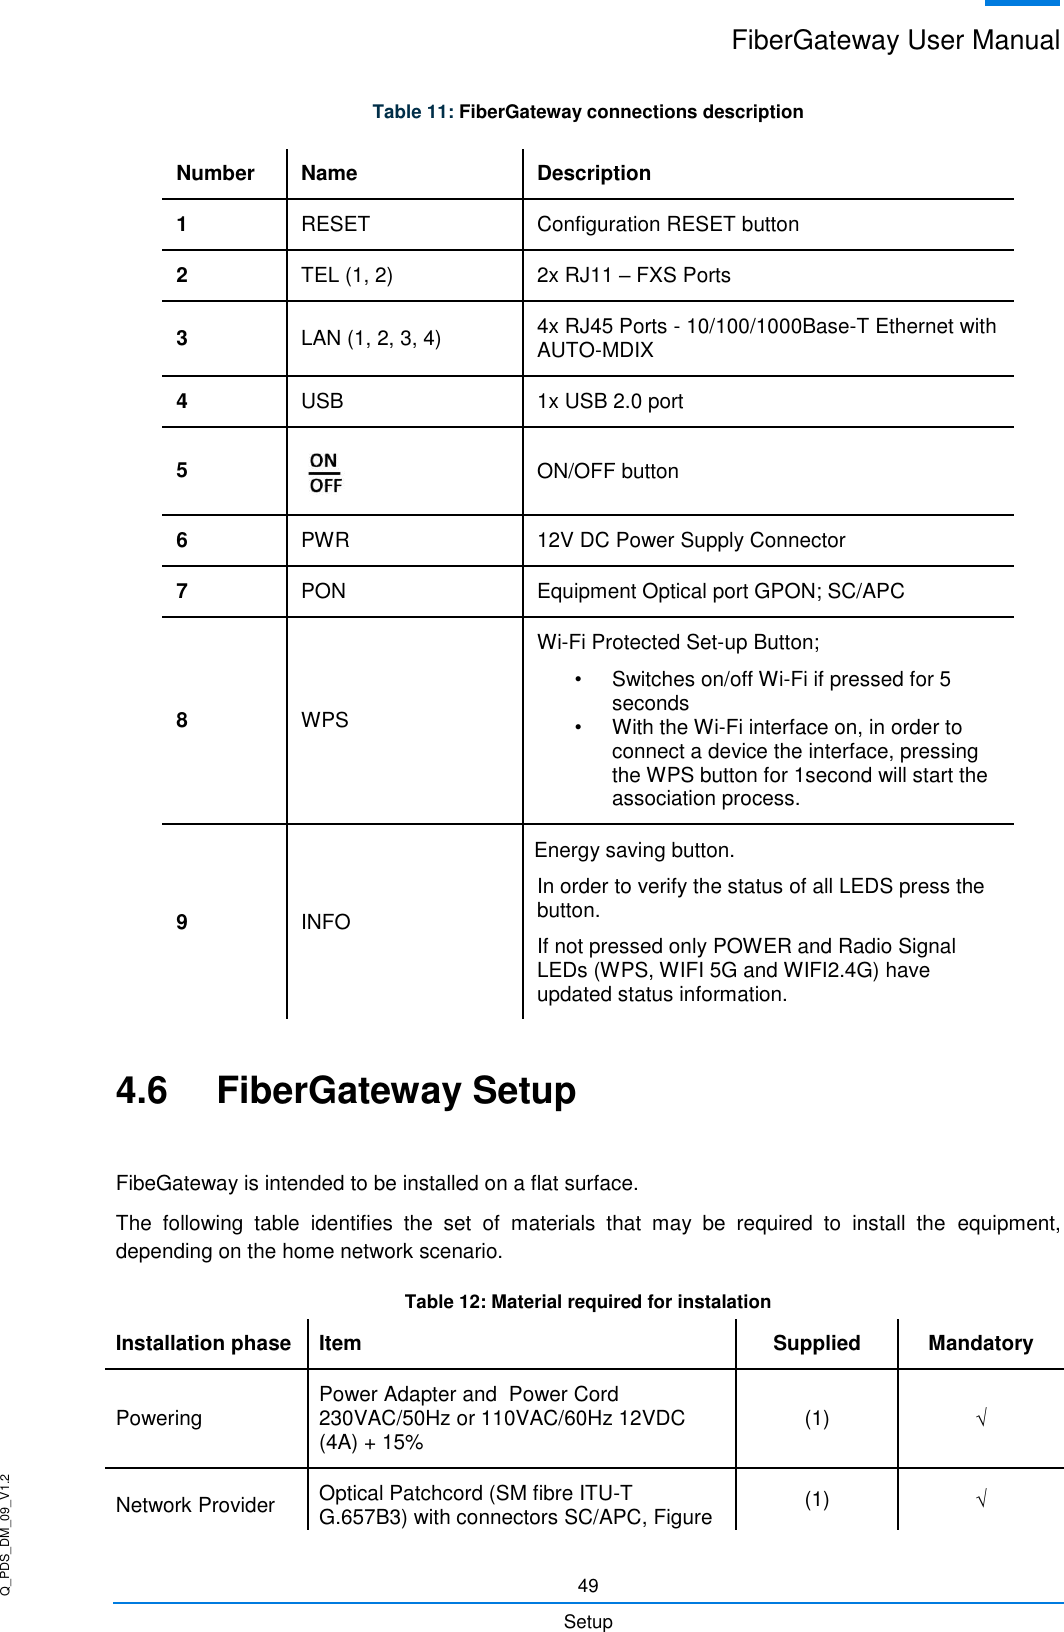 Q_PDS_DM_09_V1.2 FiberGateway User Manual  49 Setup Table 11: FiberGateway connections description Number Name Description 1 RESET Configuration RESET button 2 TEL (1, 2) 2x RJ11 – FXS Ports 3 LAN (1, 2, 3, 4) 4x RJ45 Ports - 10/100/1000Base-T Ethernet with AUTO-MDIX 4 USB  1x USB 2.0 port 5  ON/OFF button 6 PWR 12V DC Power Supply Connector 7 PON Equipment Optical port GPON; SC/APC 8 WPS Wi-Fi Protected Set-up Button; •  Switches on/off Wi-Fi if pressed for 5 seconds •  With the Wi-Fi interface on, in order to connect a device the interface, pressing the WPS button for 1second will start the association process.  9 INFO Energy saving button. In order to verify the status of all LEDS press the button. If not pressed only POWER and Radio Signal LEDs (WPS, WIFI 5G and WIFI2.4G) have updated status information. 4.6  FiberGateway Setup  FibeGateway is intended to be installed on a flat surface. The  following  table  identifies  the  set  of  materials  that  may  be  required  to  install  the  equipment, depending on the home network scenario. Table 12: Material required for instalation Installation phase Item Supplied Mandatory Powering  Power Adapter and  Power Cord 230VAC/50Hz or 110VAC/60Hz 12VDC  (4A) + 15% (1)  Network Provider Optical Patchcord (SM fibre ITU-T G.657B3) with connectors SC/APC, Figure (1)  